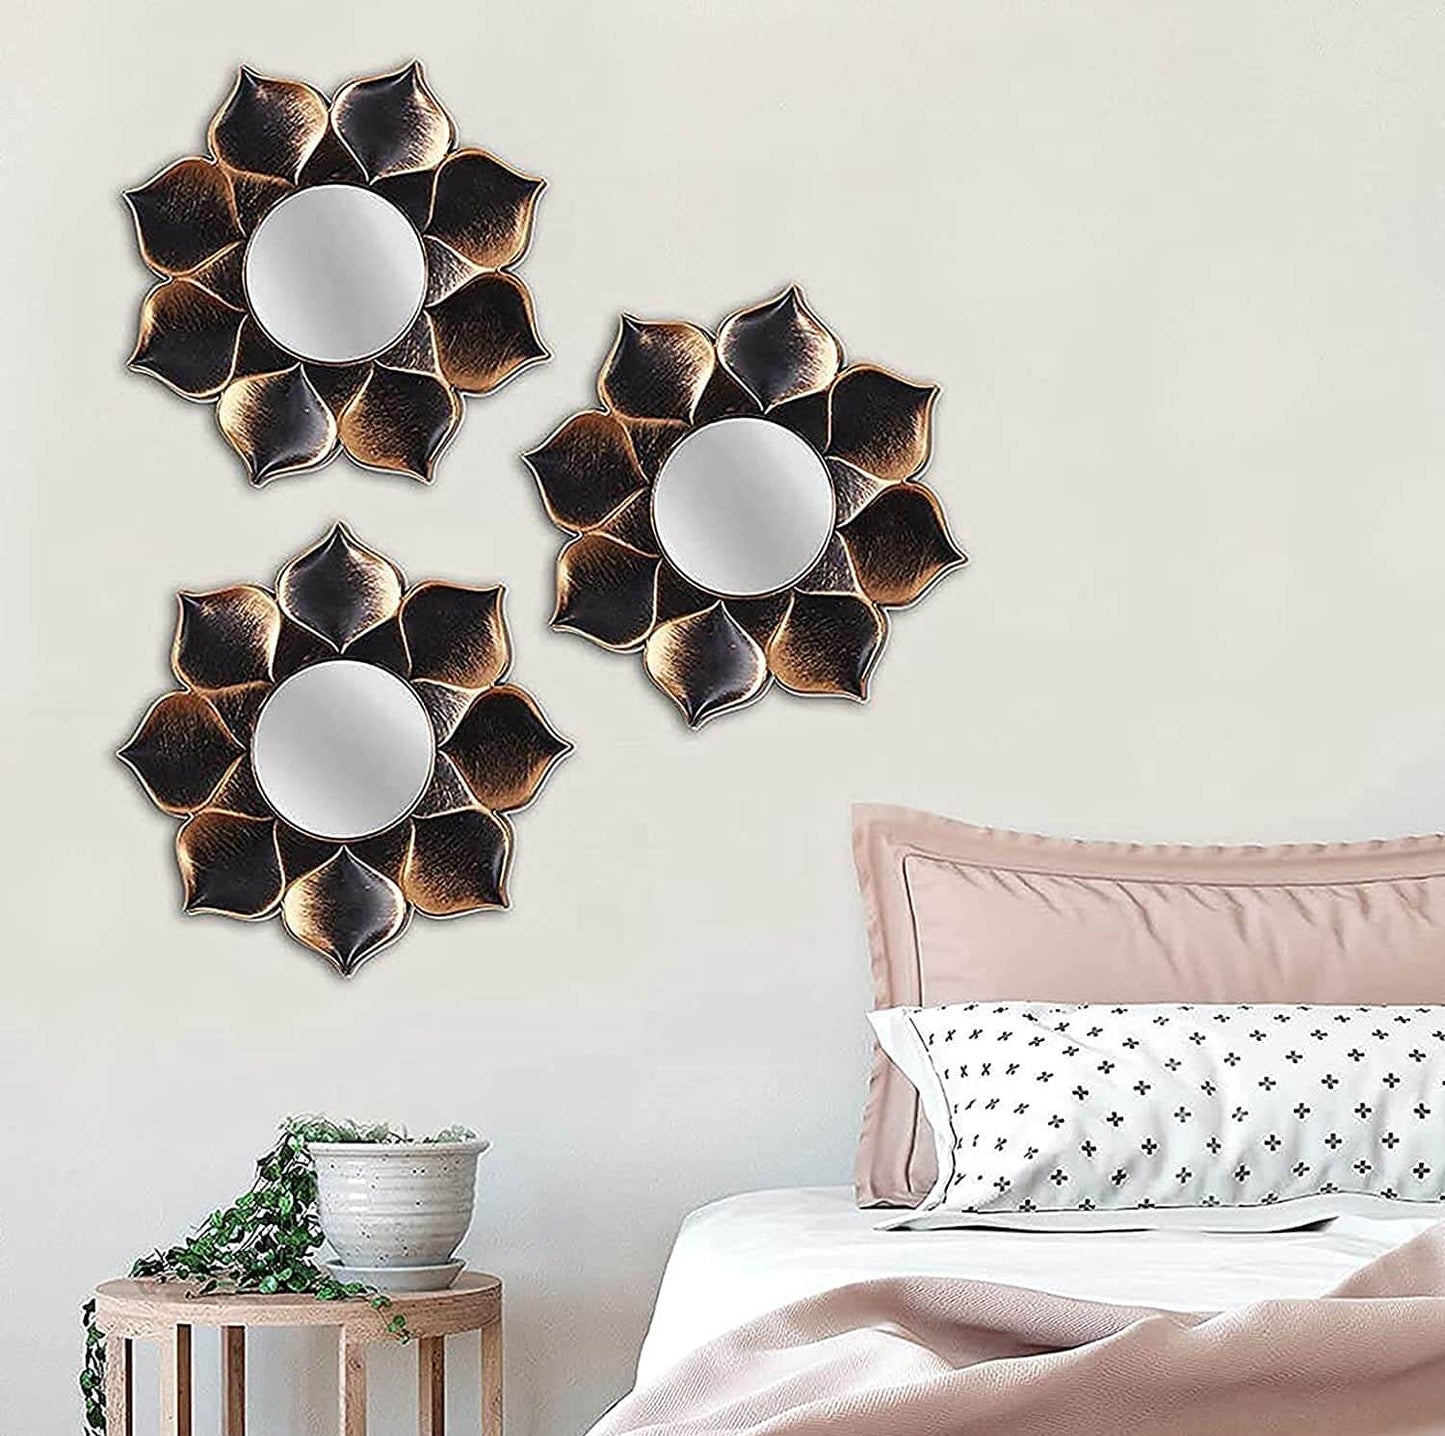 Pack of 3 - Lotus Petal Decorative Wall Mirror for Home & Decoration (Size - 9 x 9 inch) Mangal Fashions | Indian Home Decor and Craft